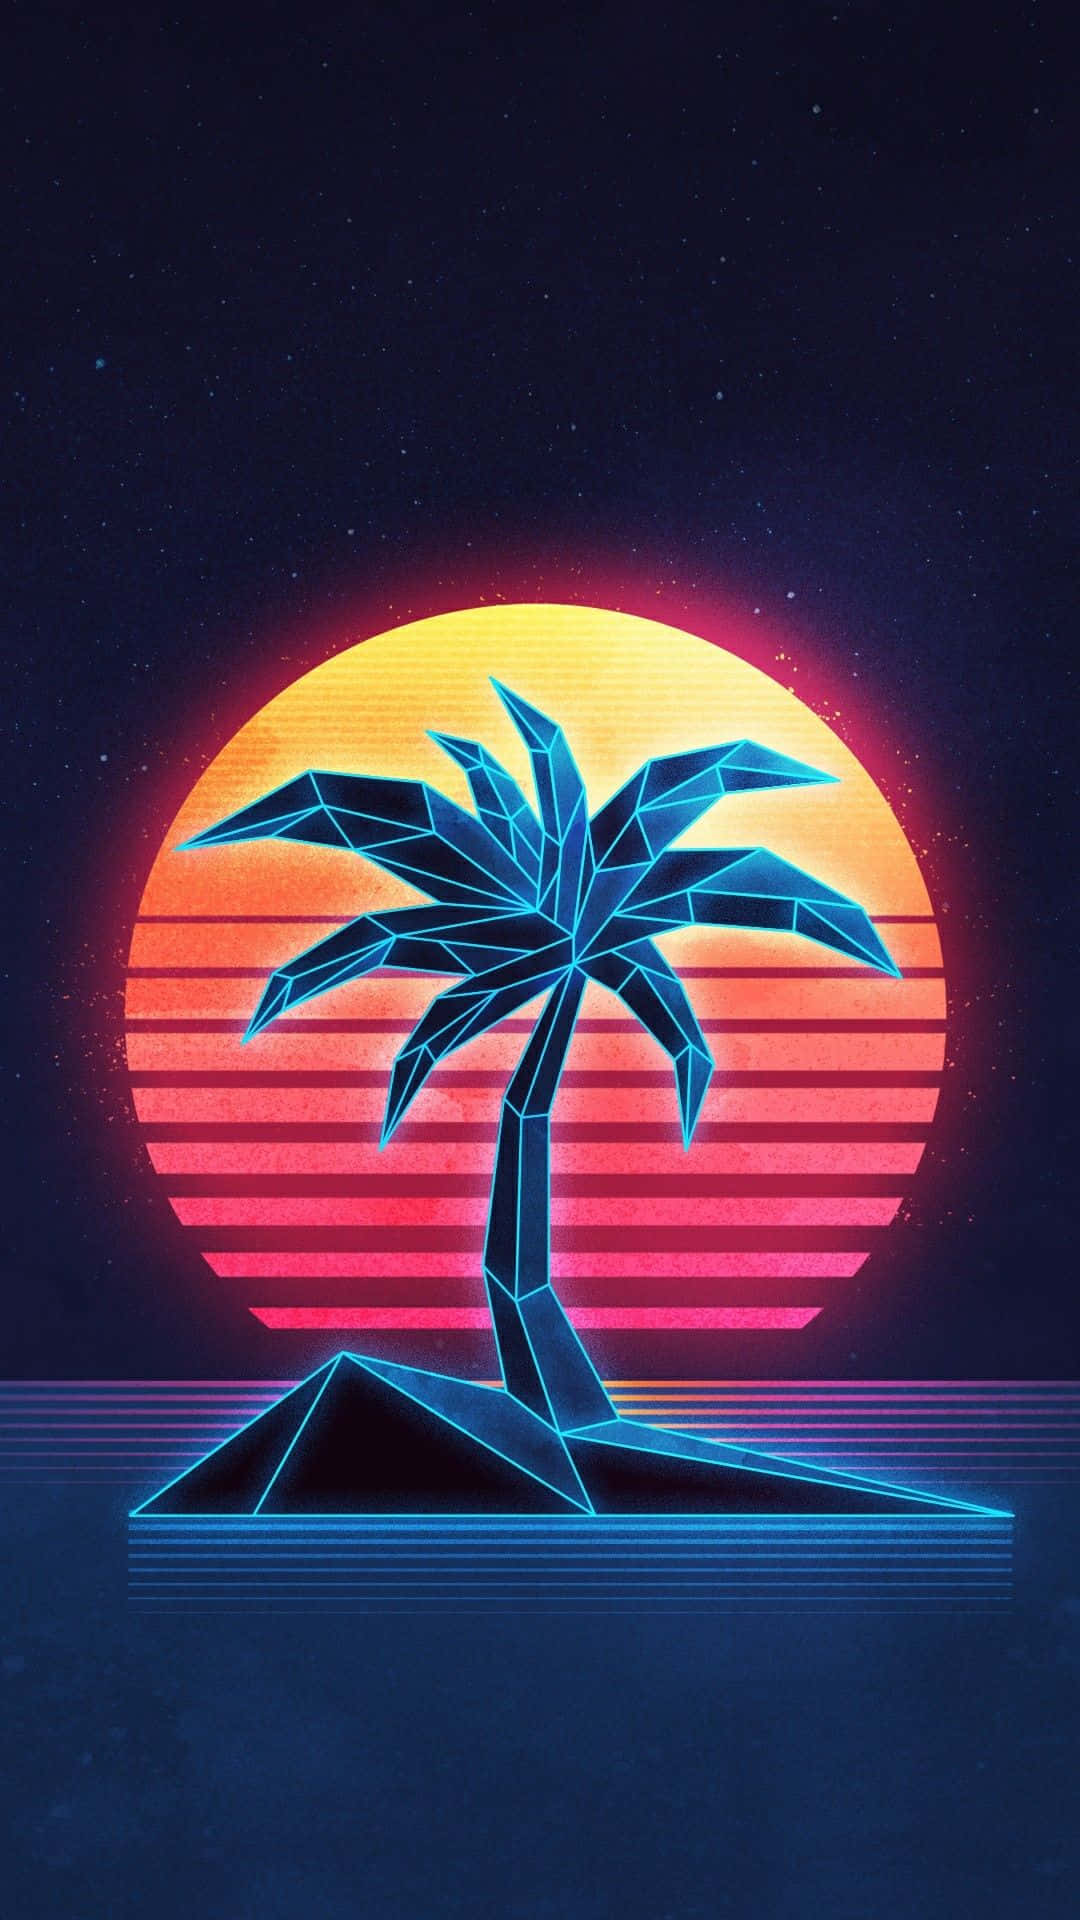 A Retro Look at the 80s Iphone Wallpaper